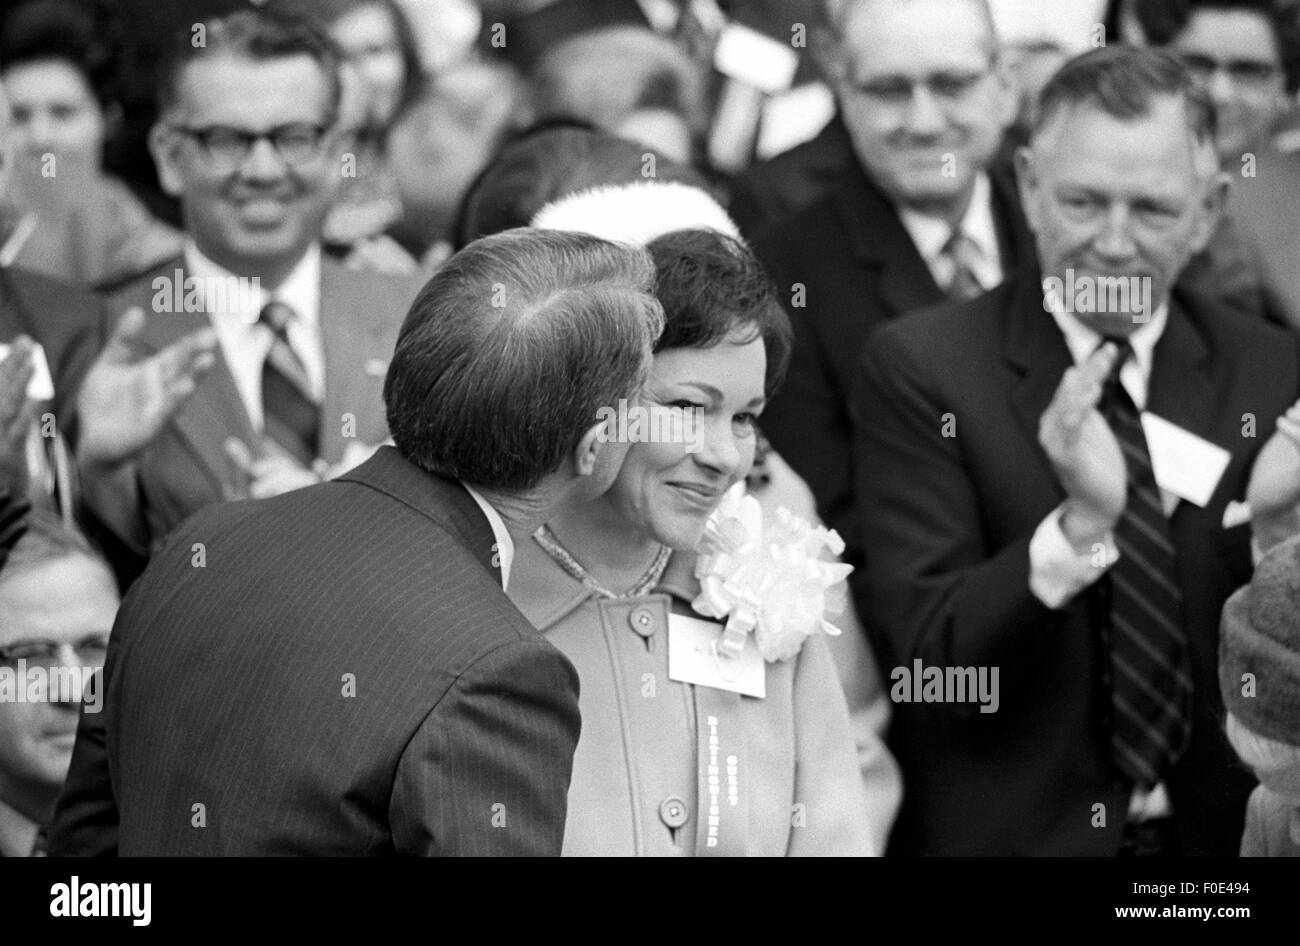 Georgia state senator and governor elect Jimmy Carter at his 1971 gubernatorial inauguration. Carter succeeded segregationist Lester Maddox as Georgia governor. Carter is seated with his wife Rosalynn and daughter Amy. 1st Jan, 2015. © Ken Hawkins/ZUMA Wire/Alamy Live News Stock Photo